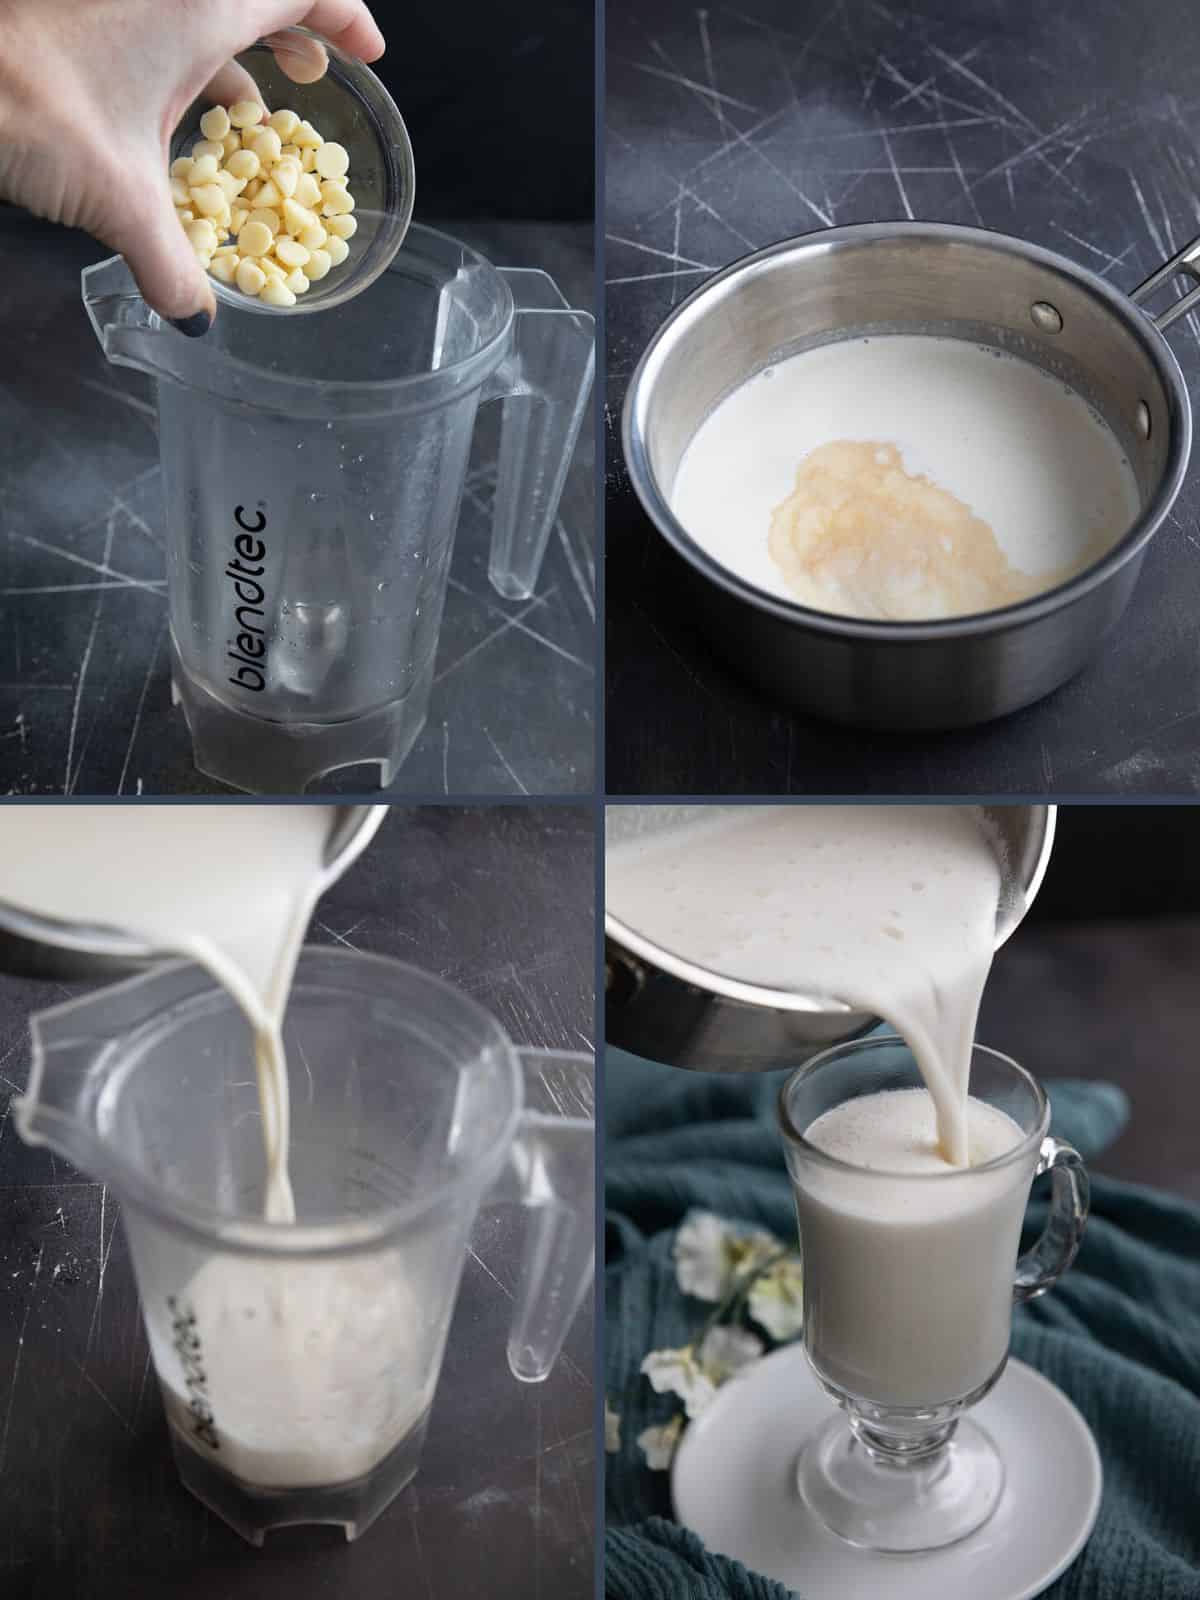 4 images showing the steps for making keto white hot chocolate.